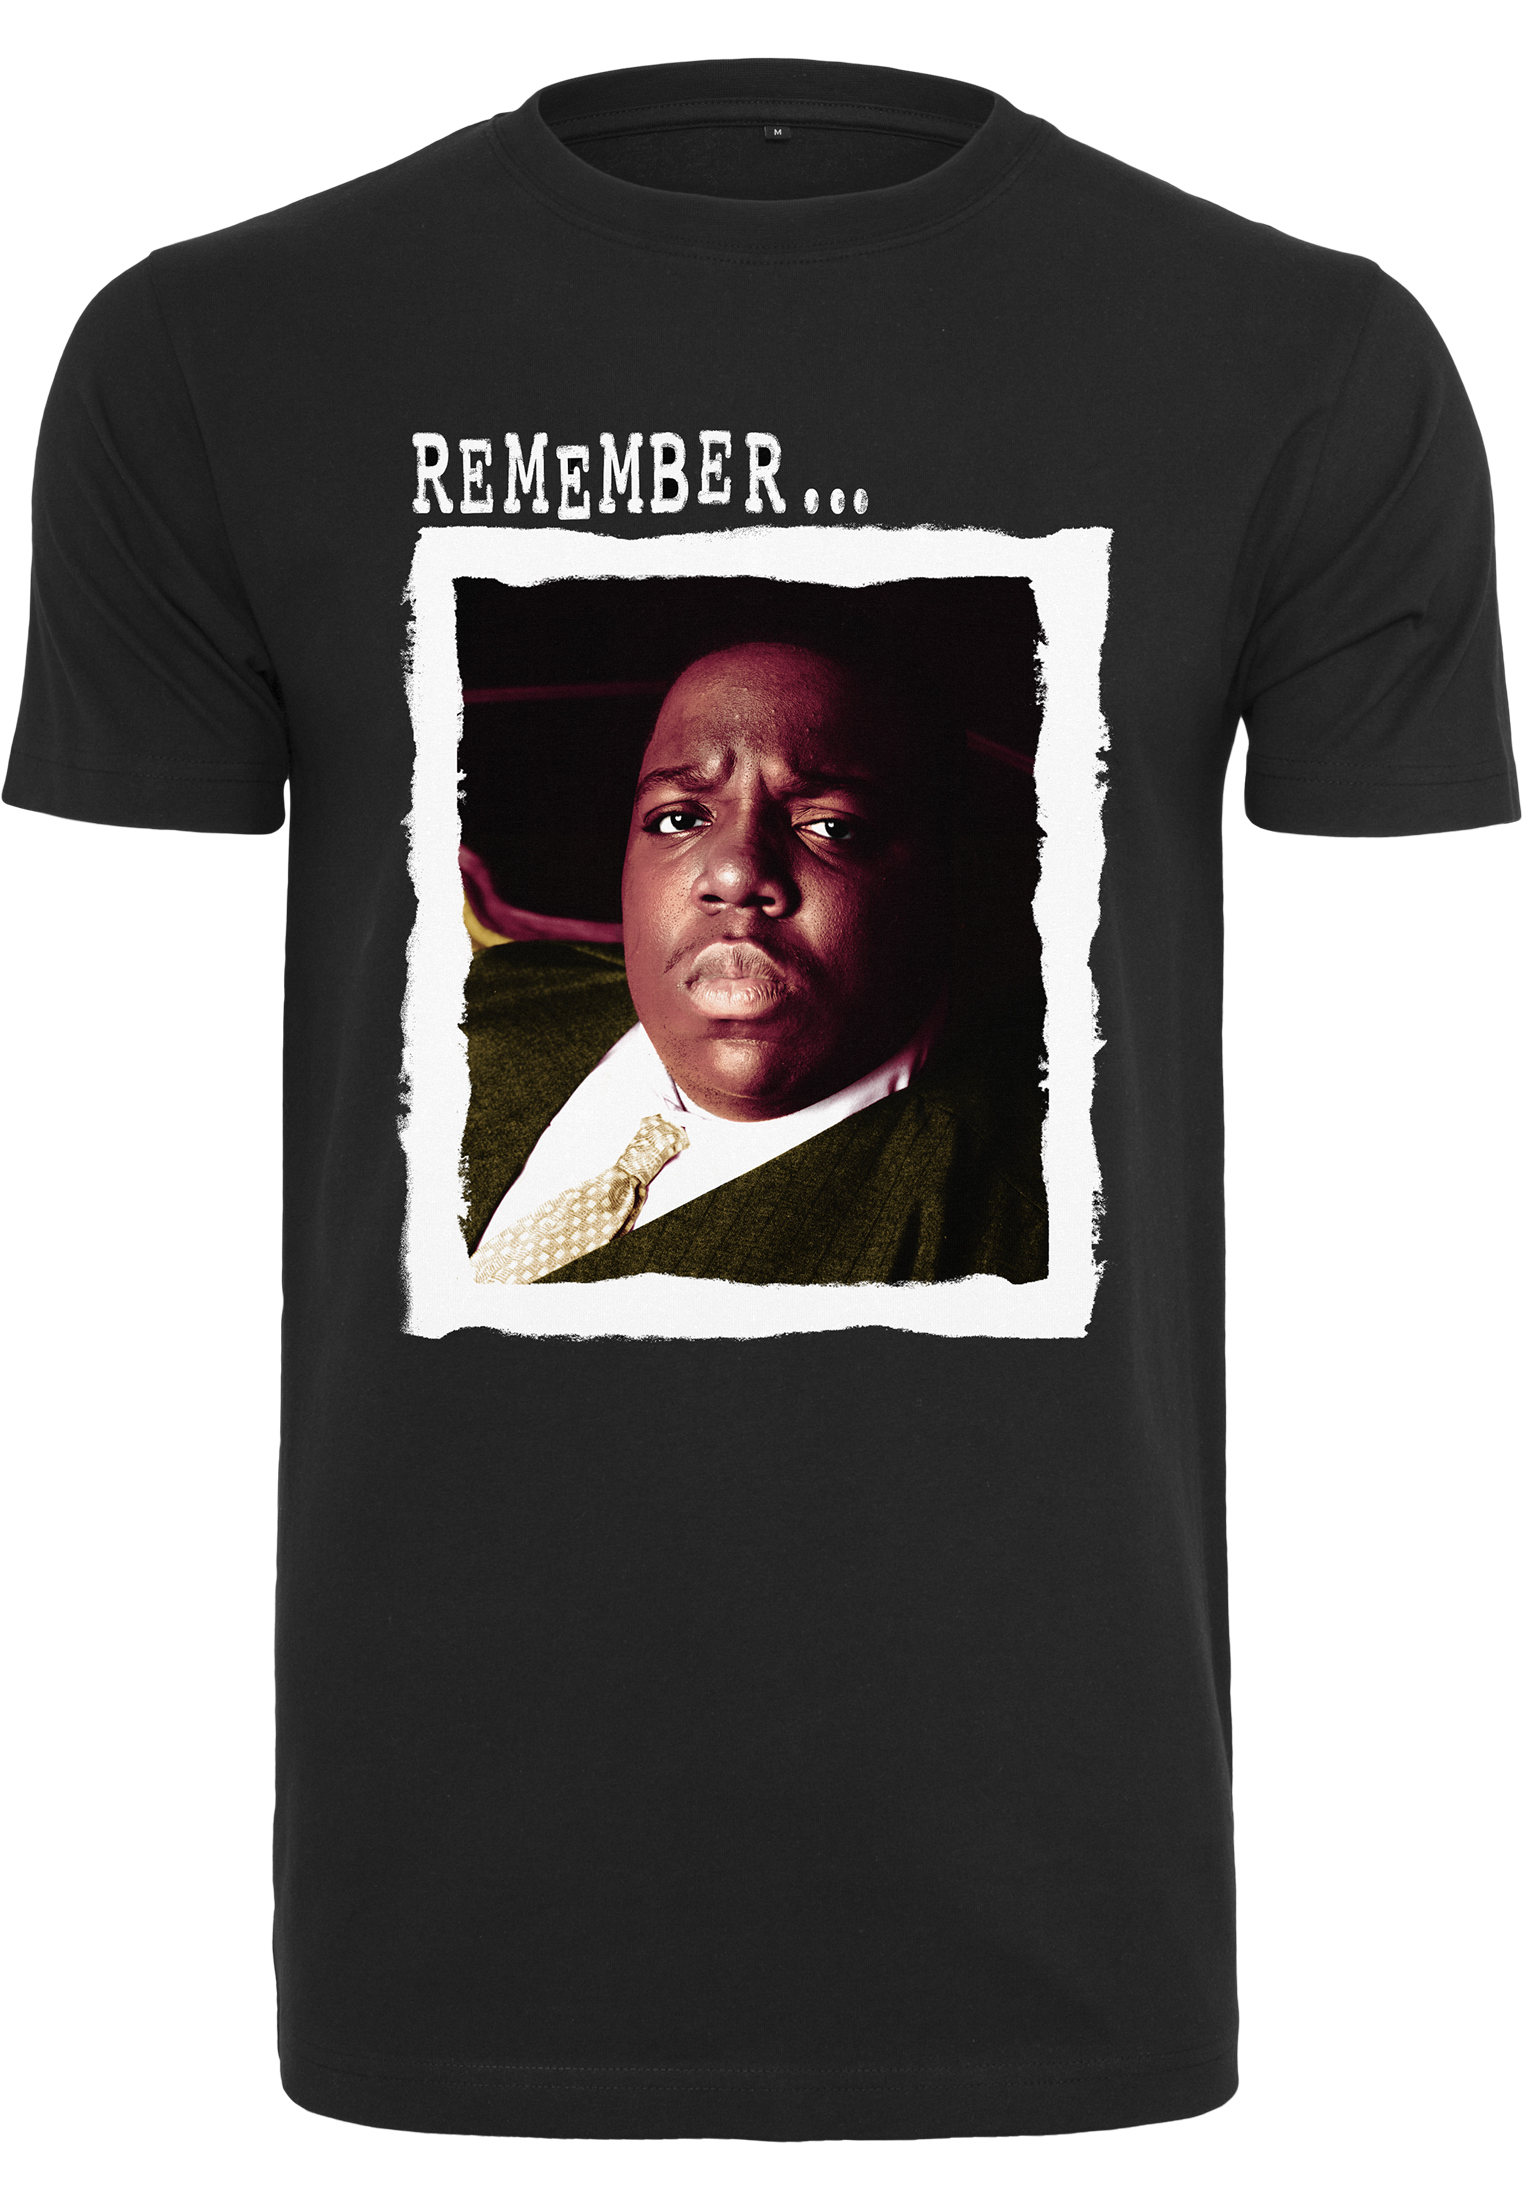 The notorious Big Remember T-shirt black